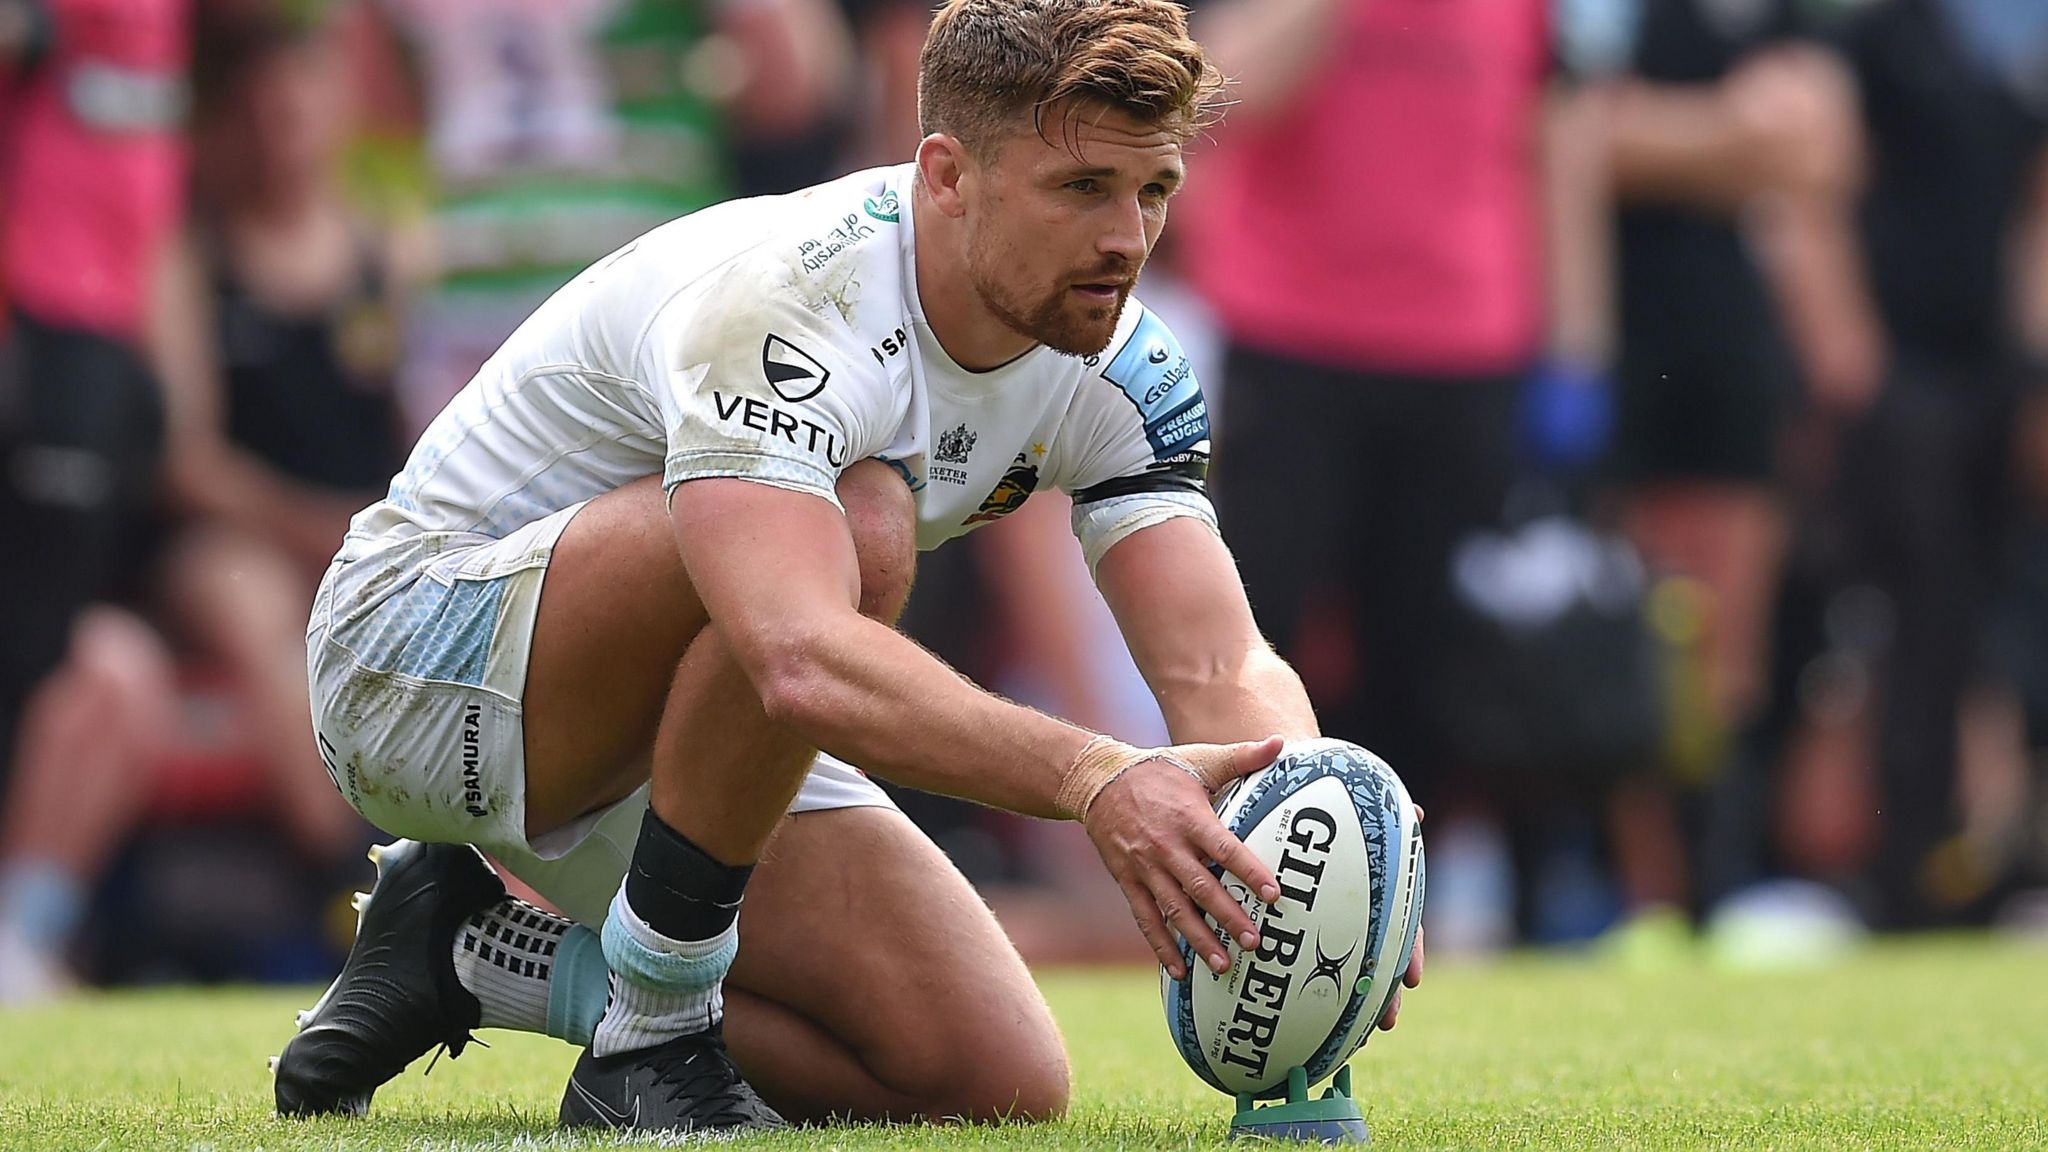 Henry Slade lines up a conversion while playing for Exeter Chiefs